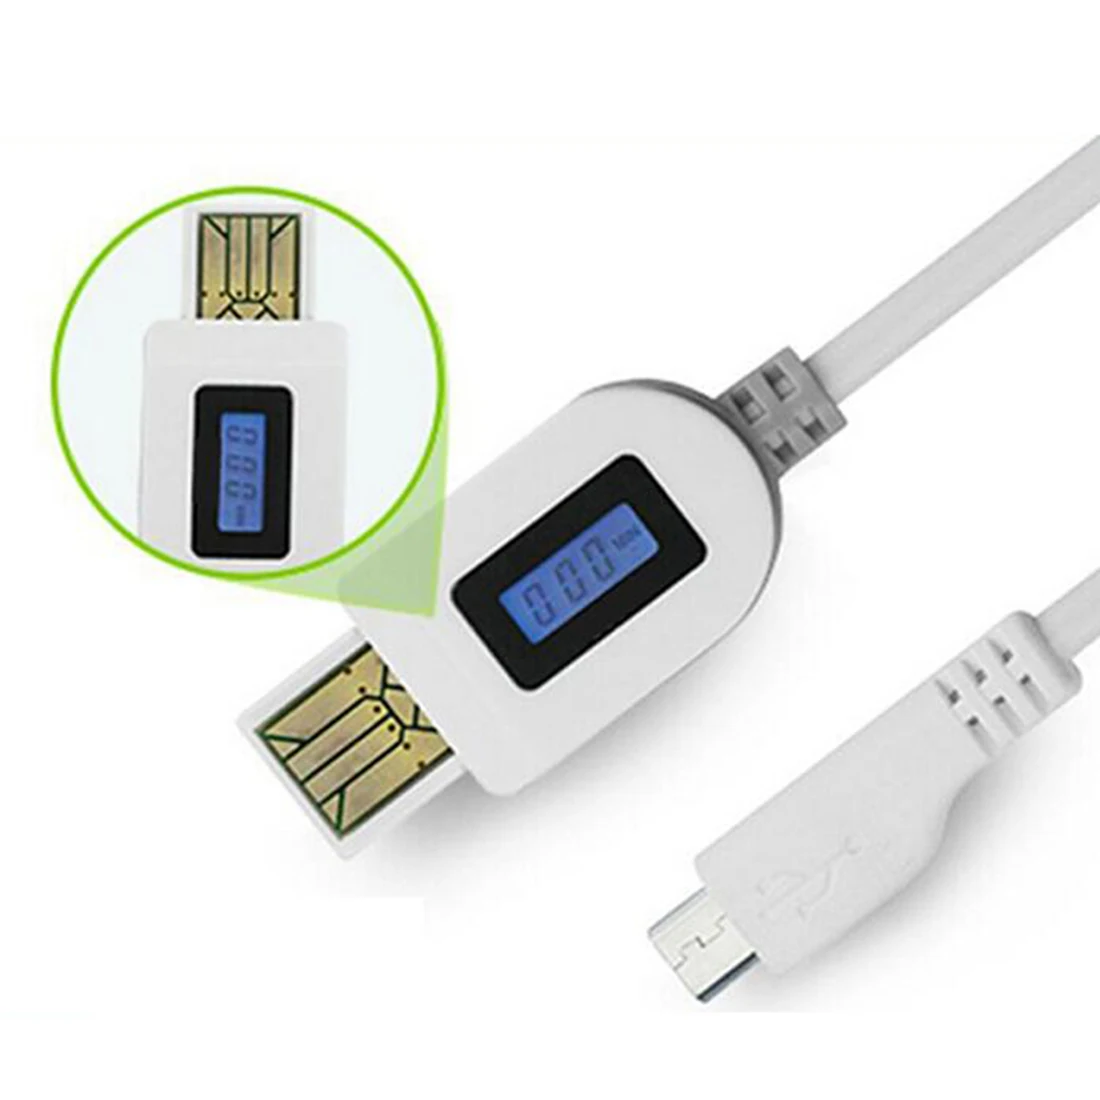  Micro USB Data Cable LCD Digital Indicator Current Voltage Charging Time For Android Phones Charger Doctor Wire 